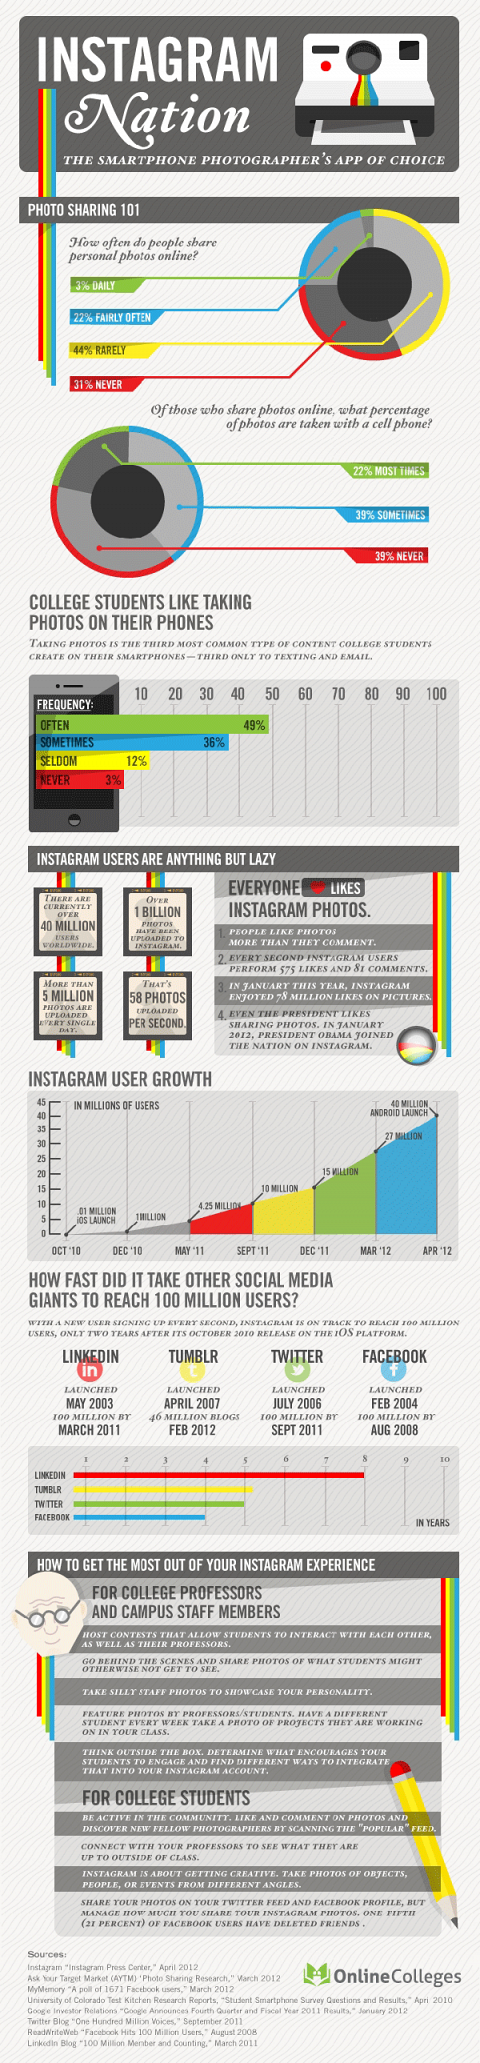 instagram, infographic, phoneography, iphoneography, digital photography